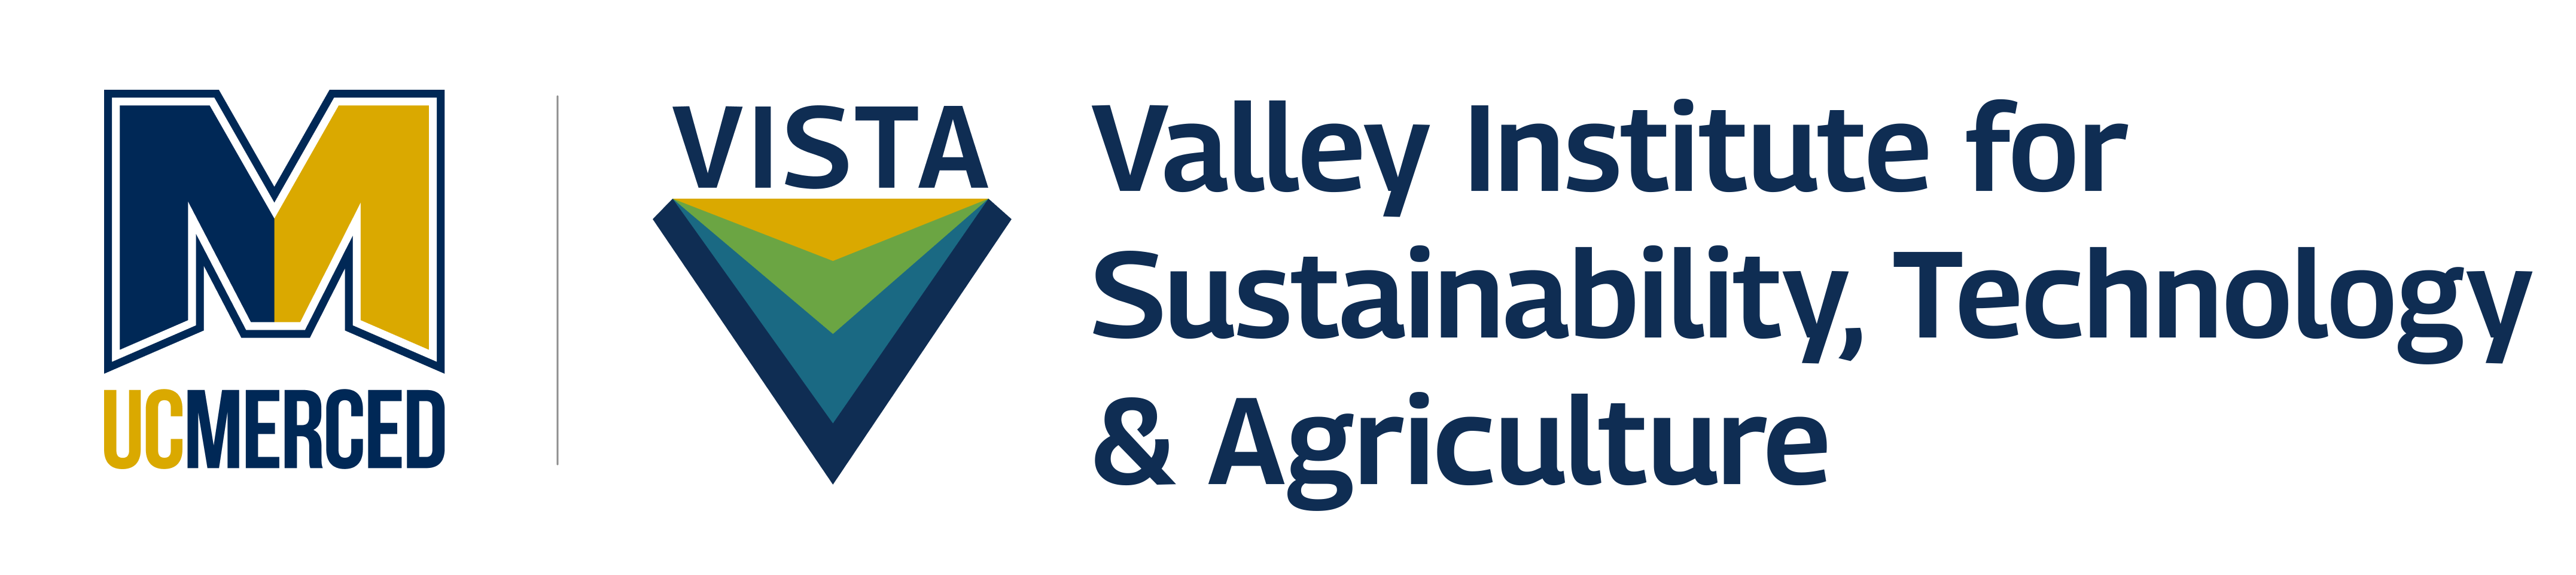 UC Merced Valley Institute for Sustainability, Technology, and Agriculture logo